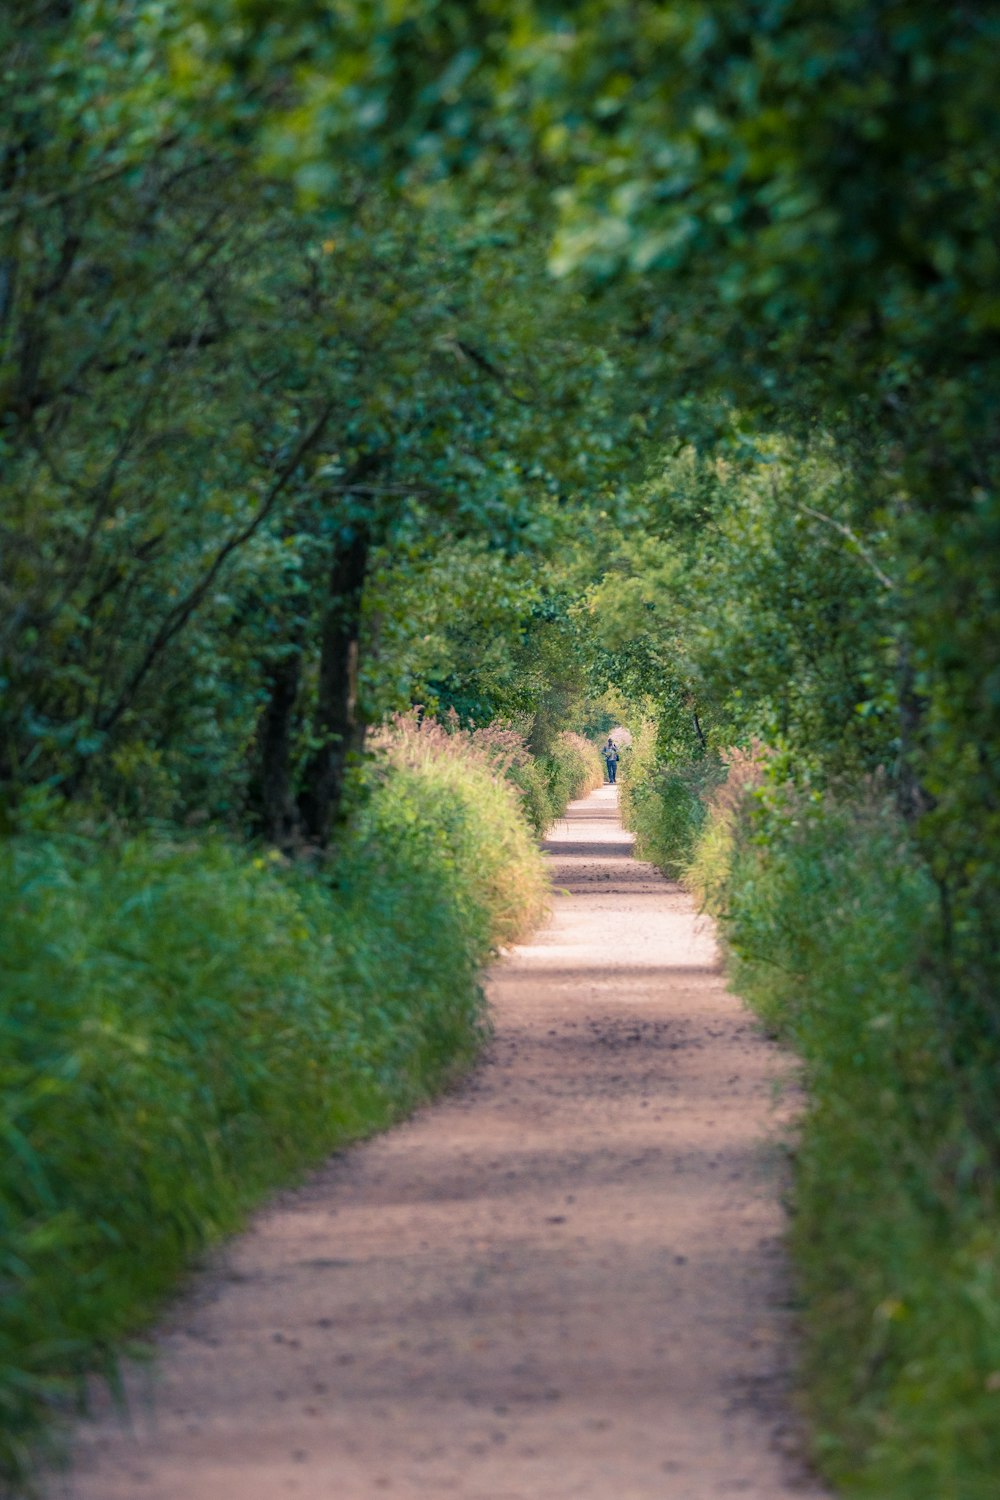 a person walking on a path through a forest